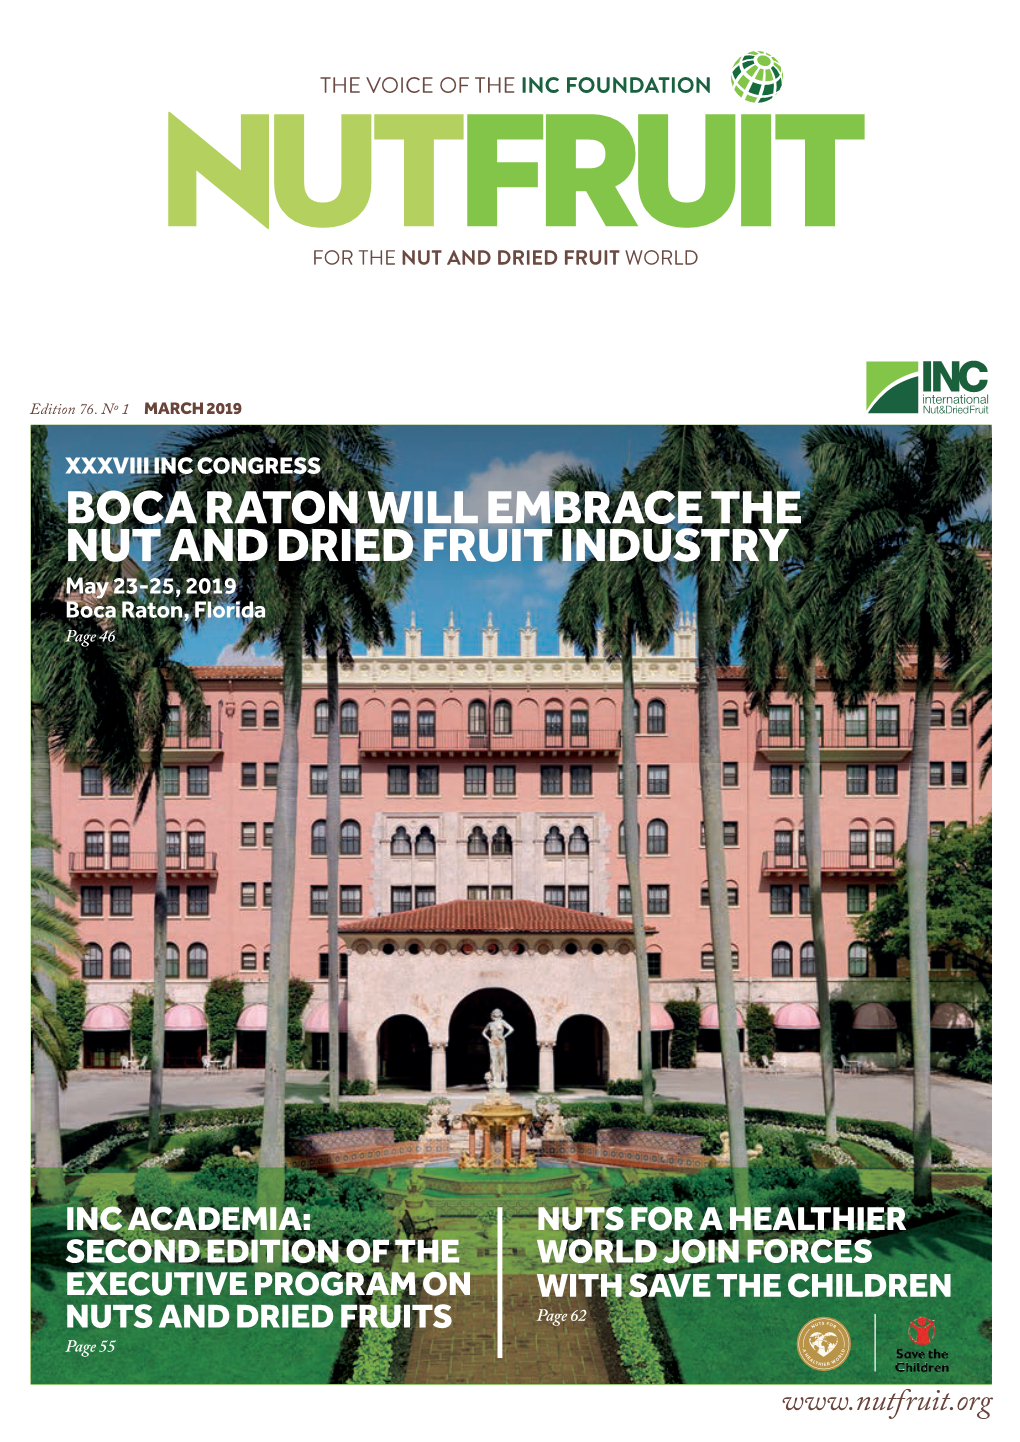 BOCA RATON WILL EMBRACE the NUT and DRIED FRUIT INDUSTRY May 23-25, 2019 Boca Raton, Florida Page 46